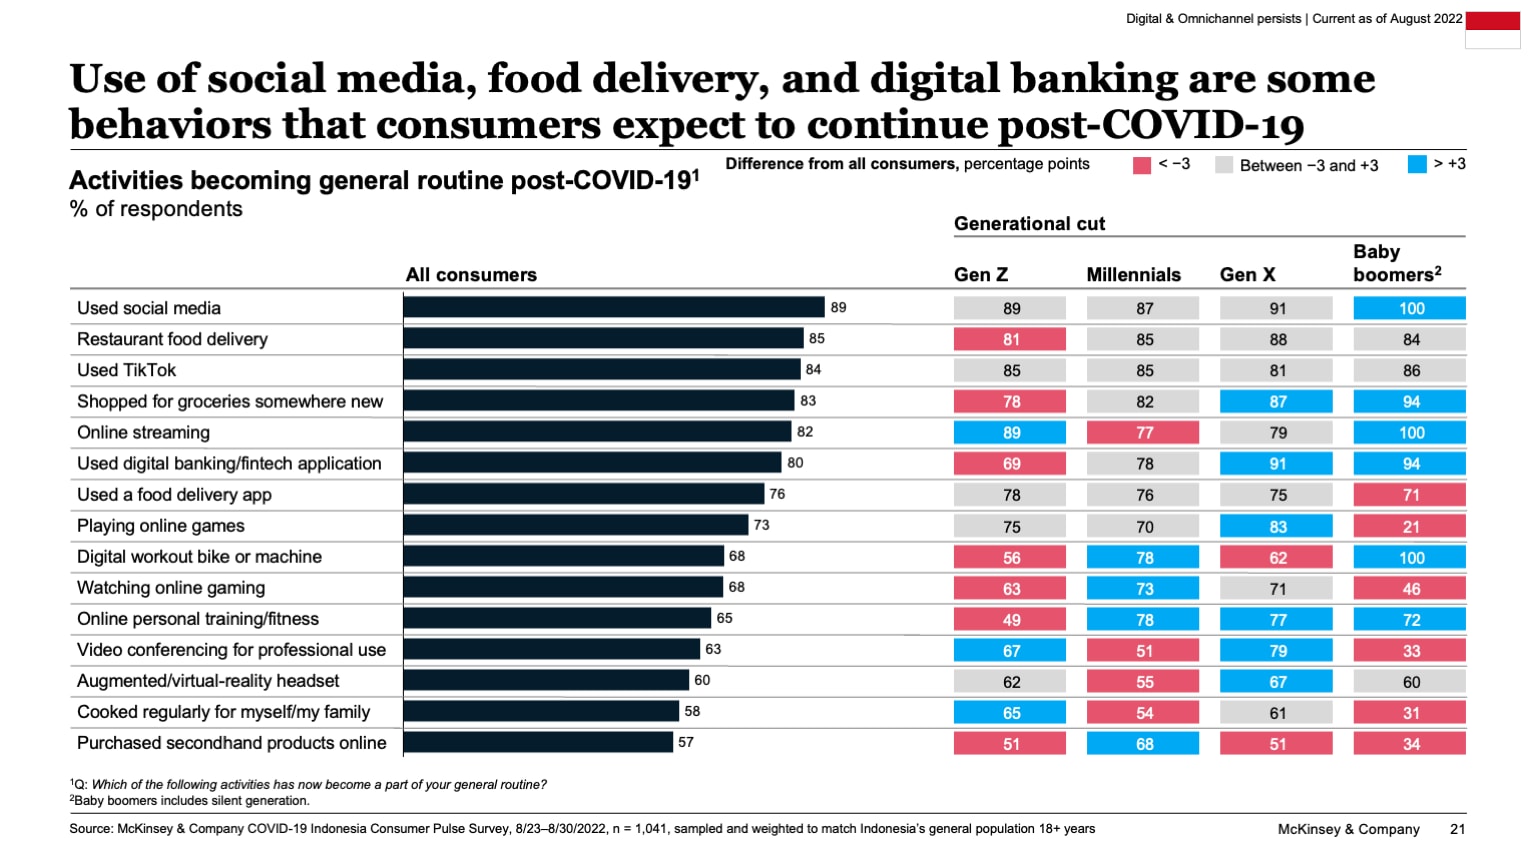 Use of social media, food delivery, and digital banking are some behaviors that consumers expect to continue post-COVID-19